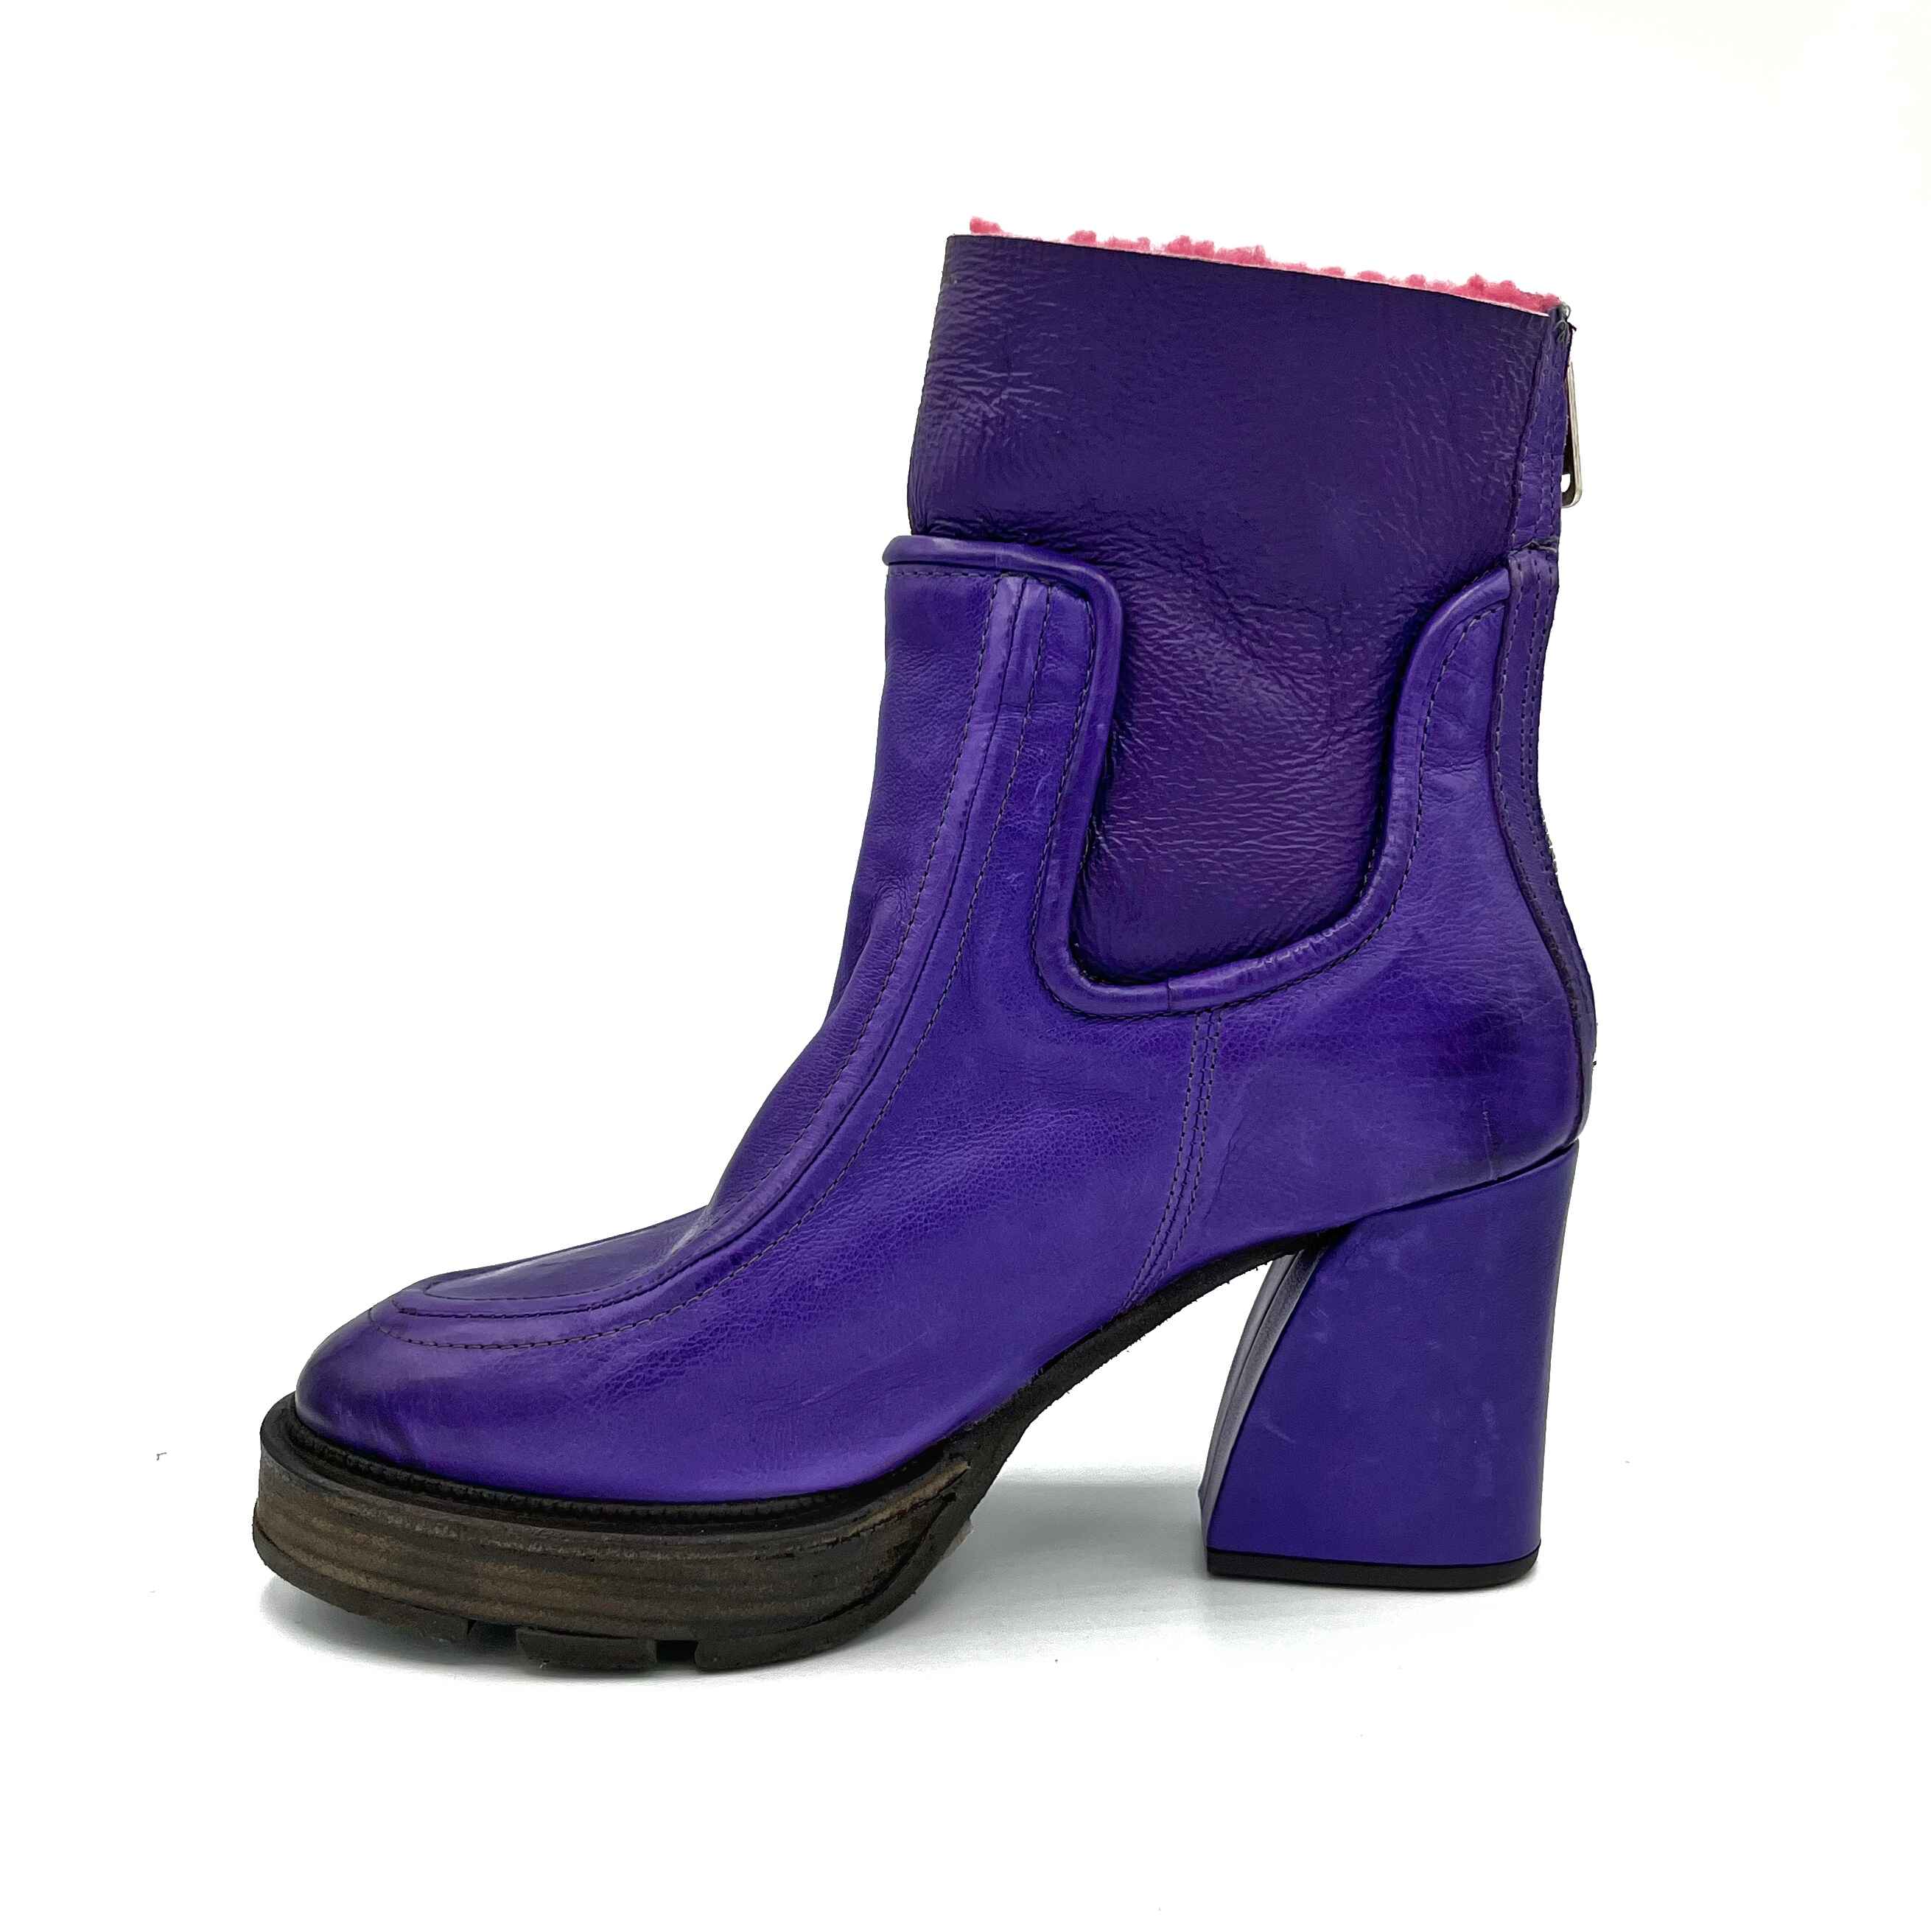 A.S.98 Platform Ankle Boots for Women